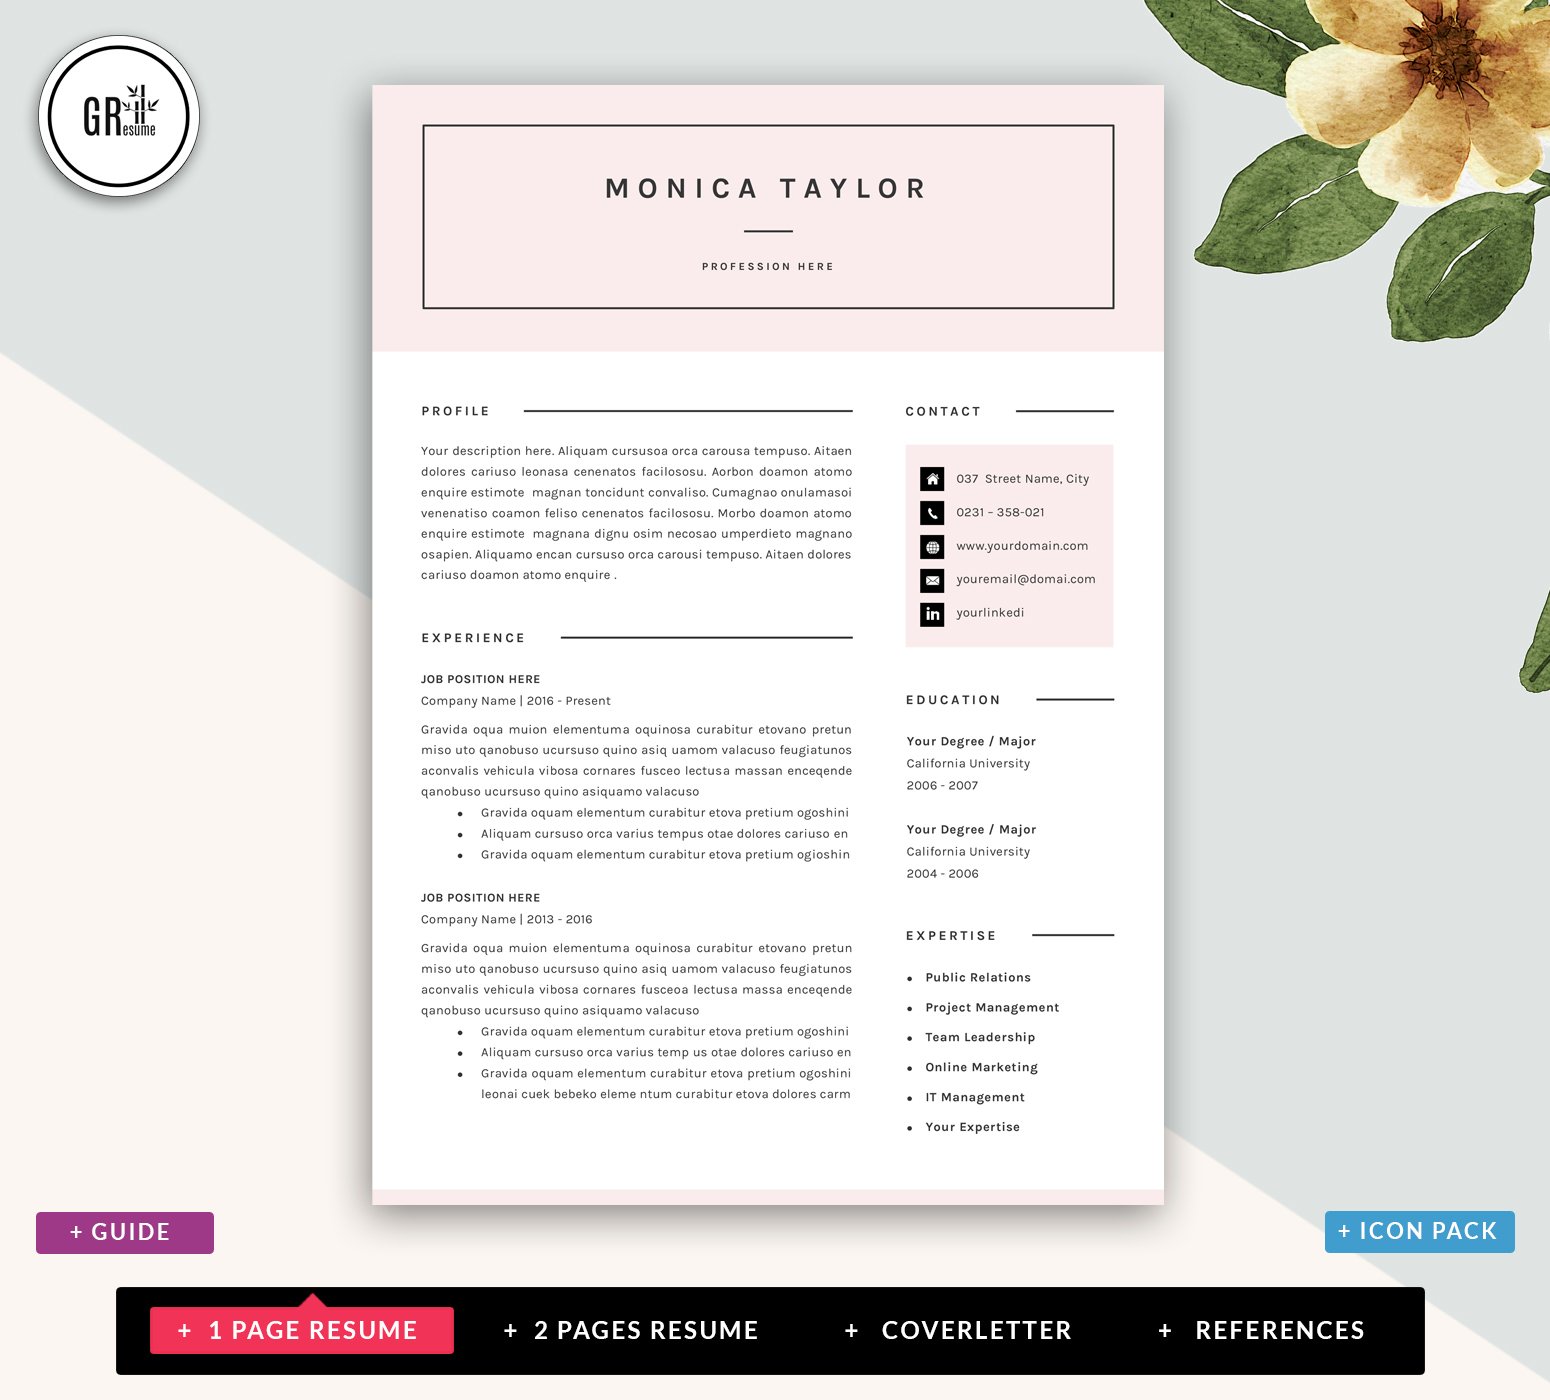 Creative CV Resume Template - 0122 preview image.